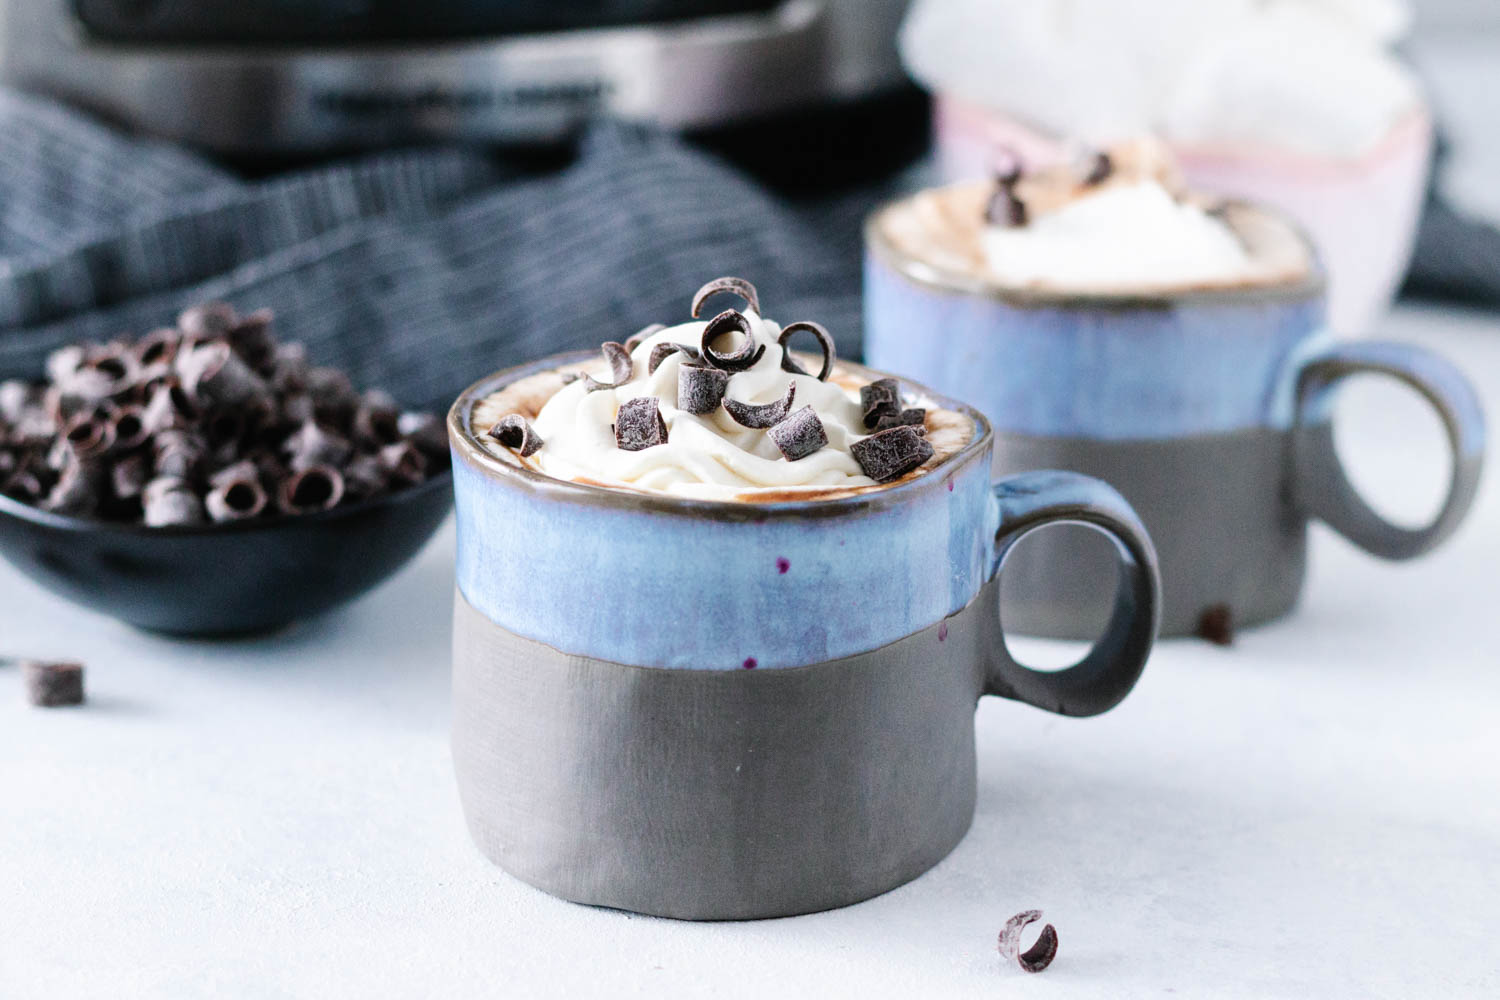 Creamy Slow Cooker Hot Chocolate - Goodie Godmother